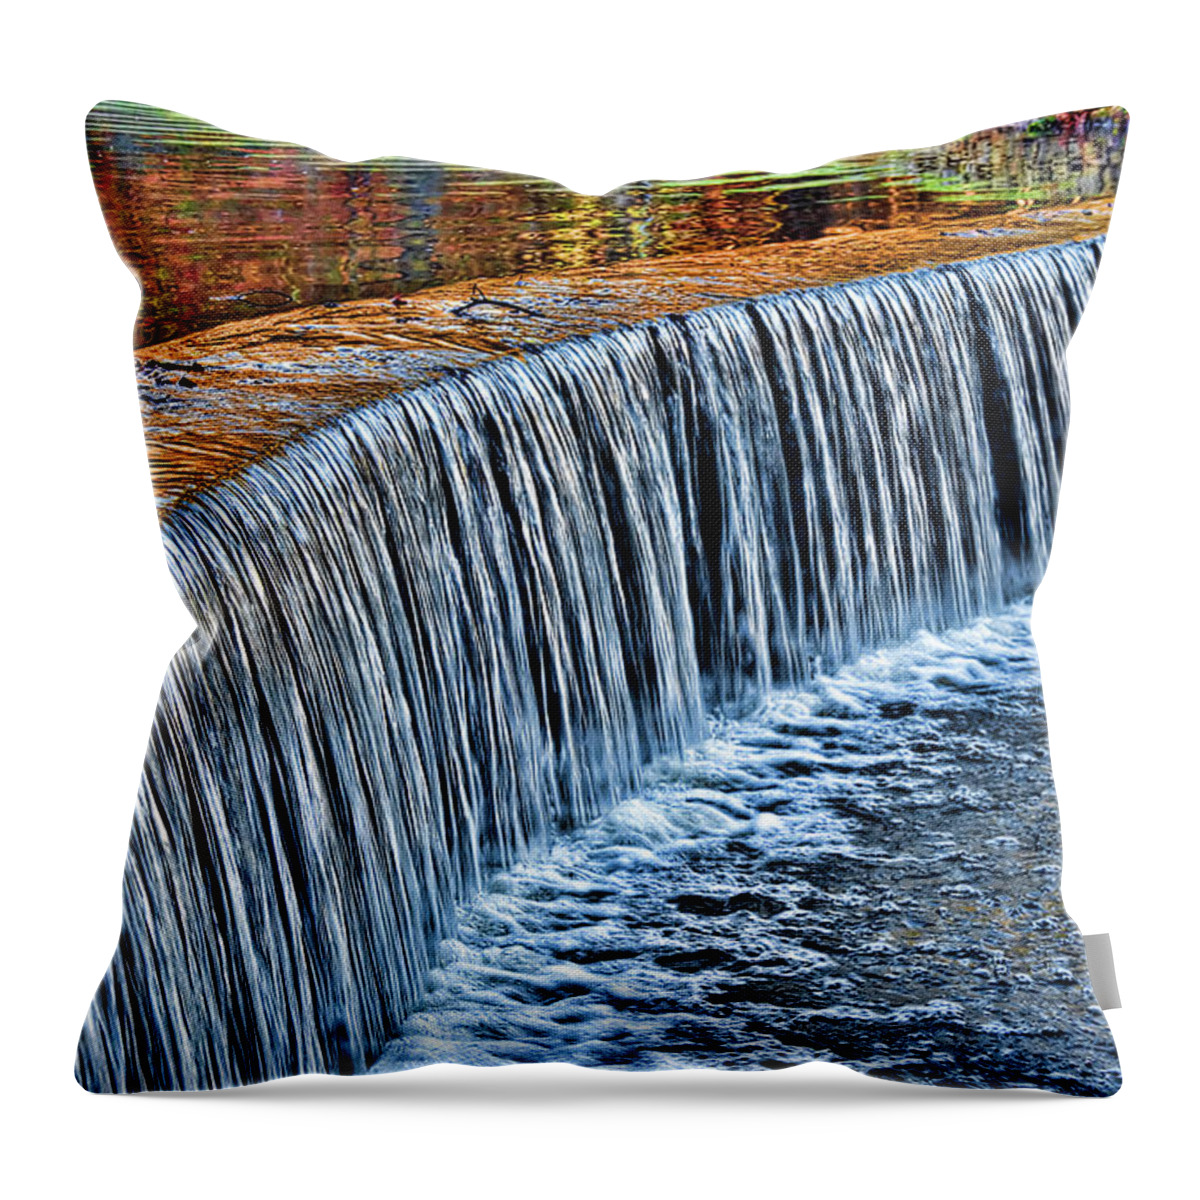 Water Throw Pillow featuring the photograph Waterfall Near Flatrock by Anthony M Davis